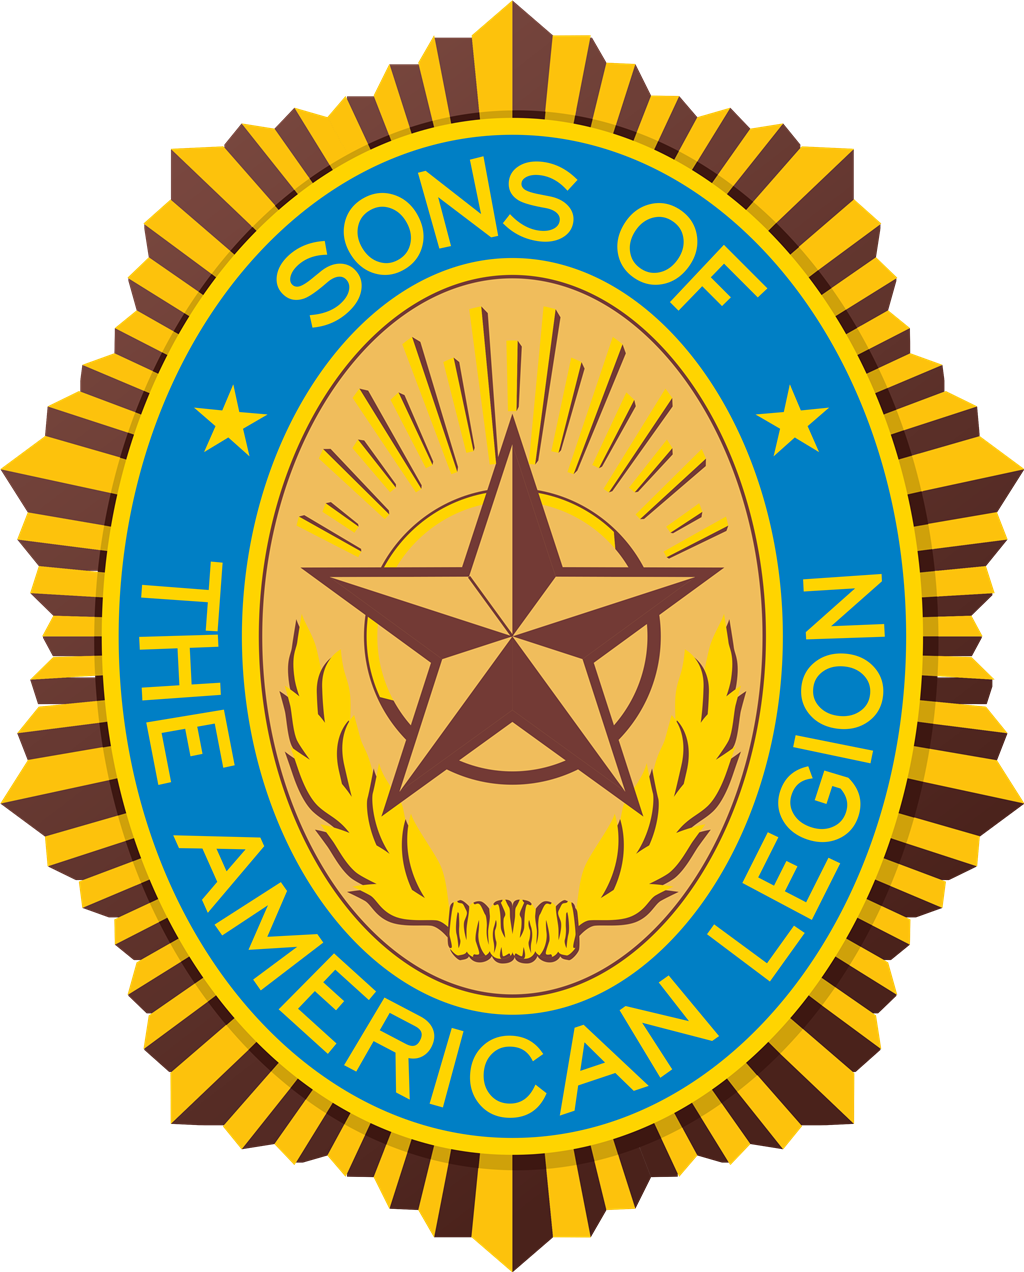 Sons of The American Legion logotype, transparent .png, medium, large